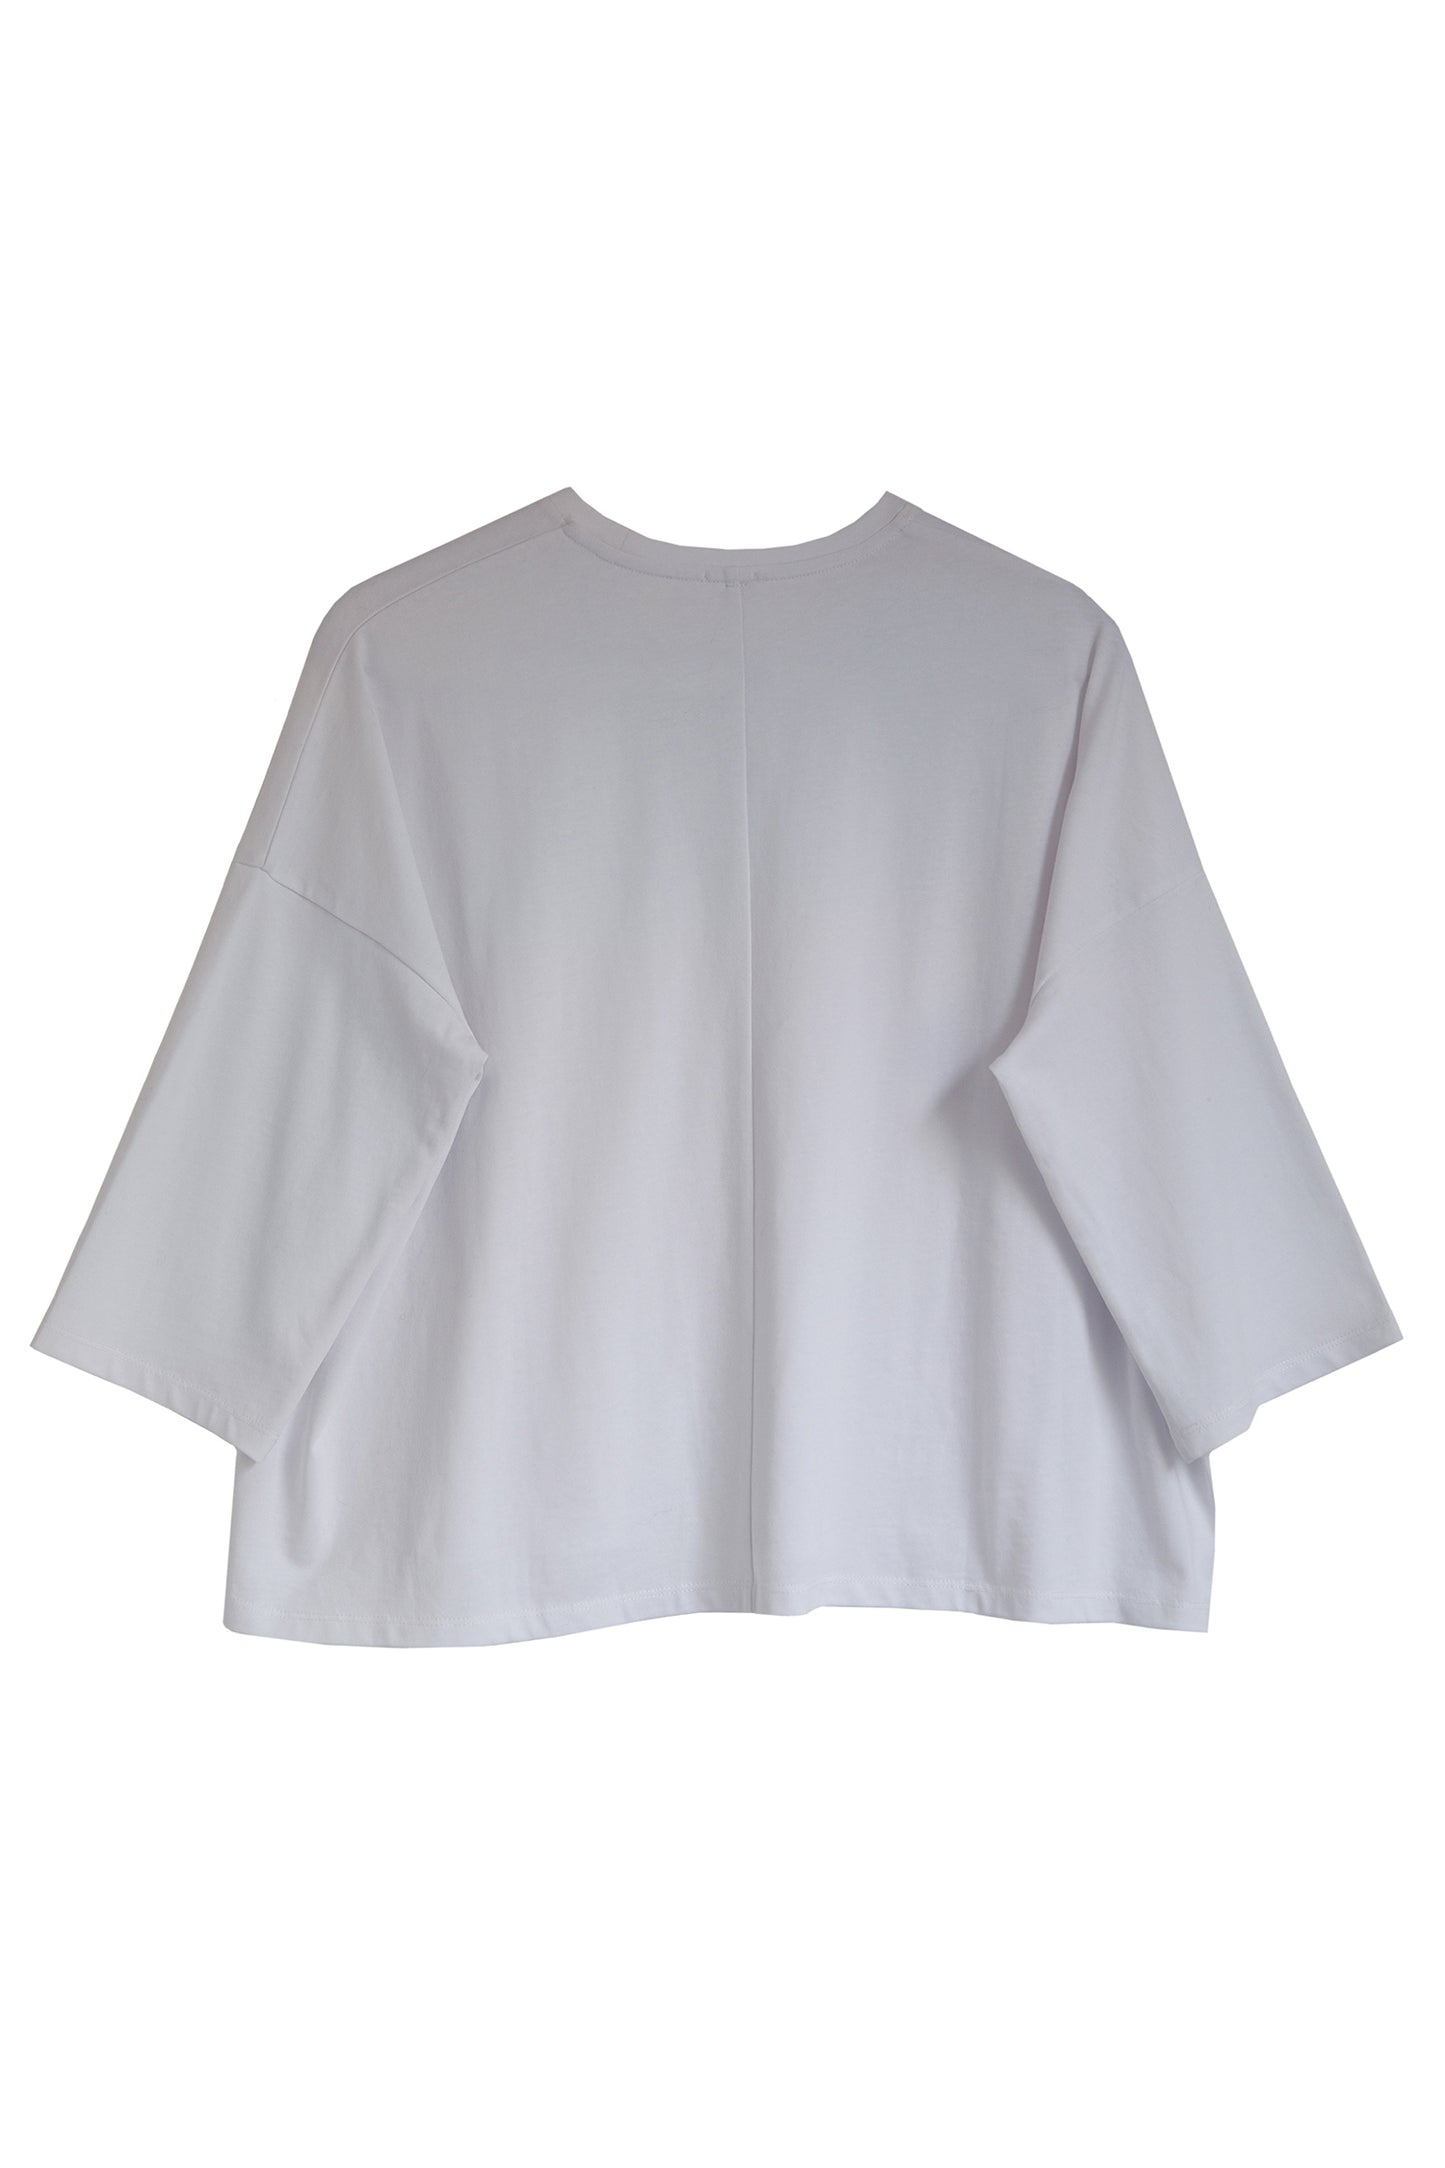 23AW Cotton jersey half sleeve pullover/ CT23301